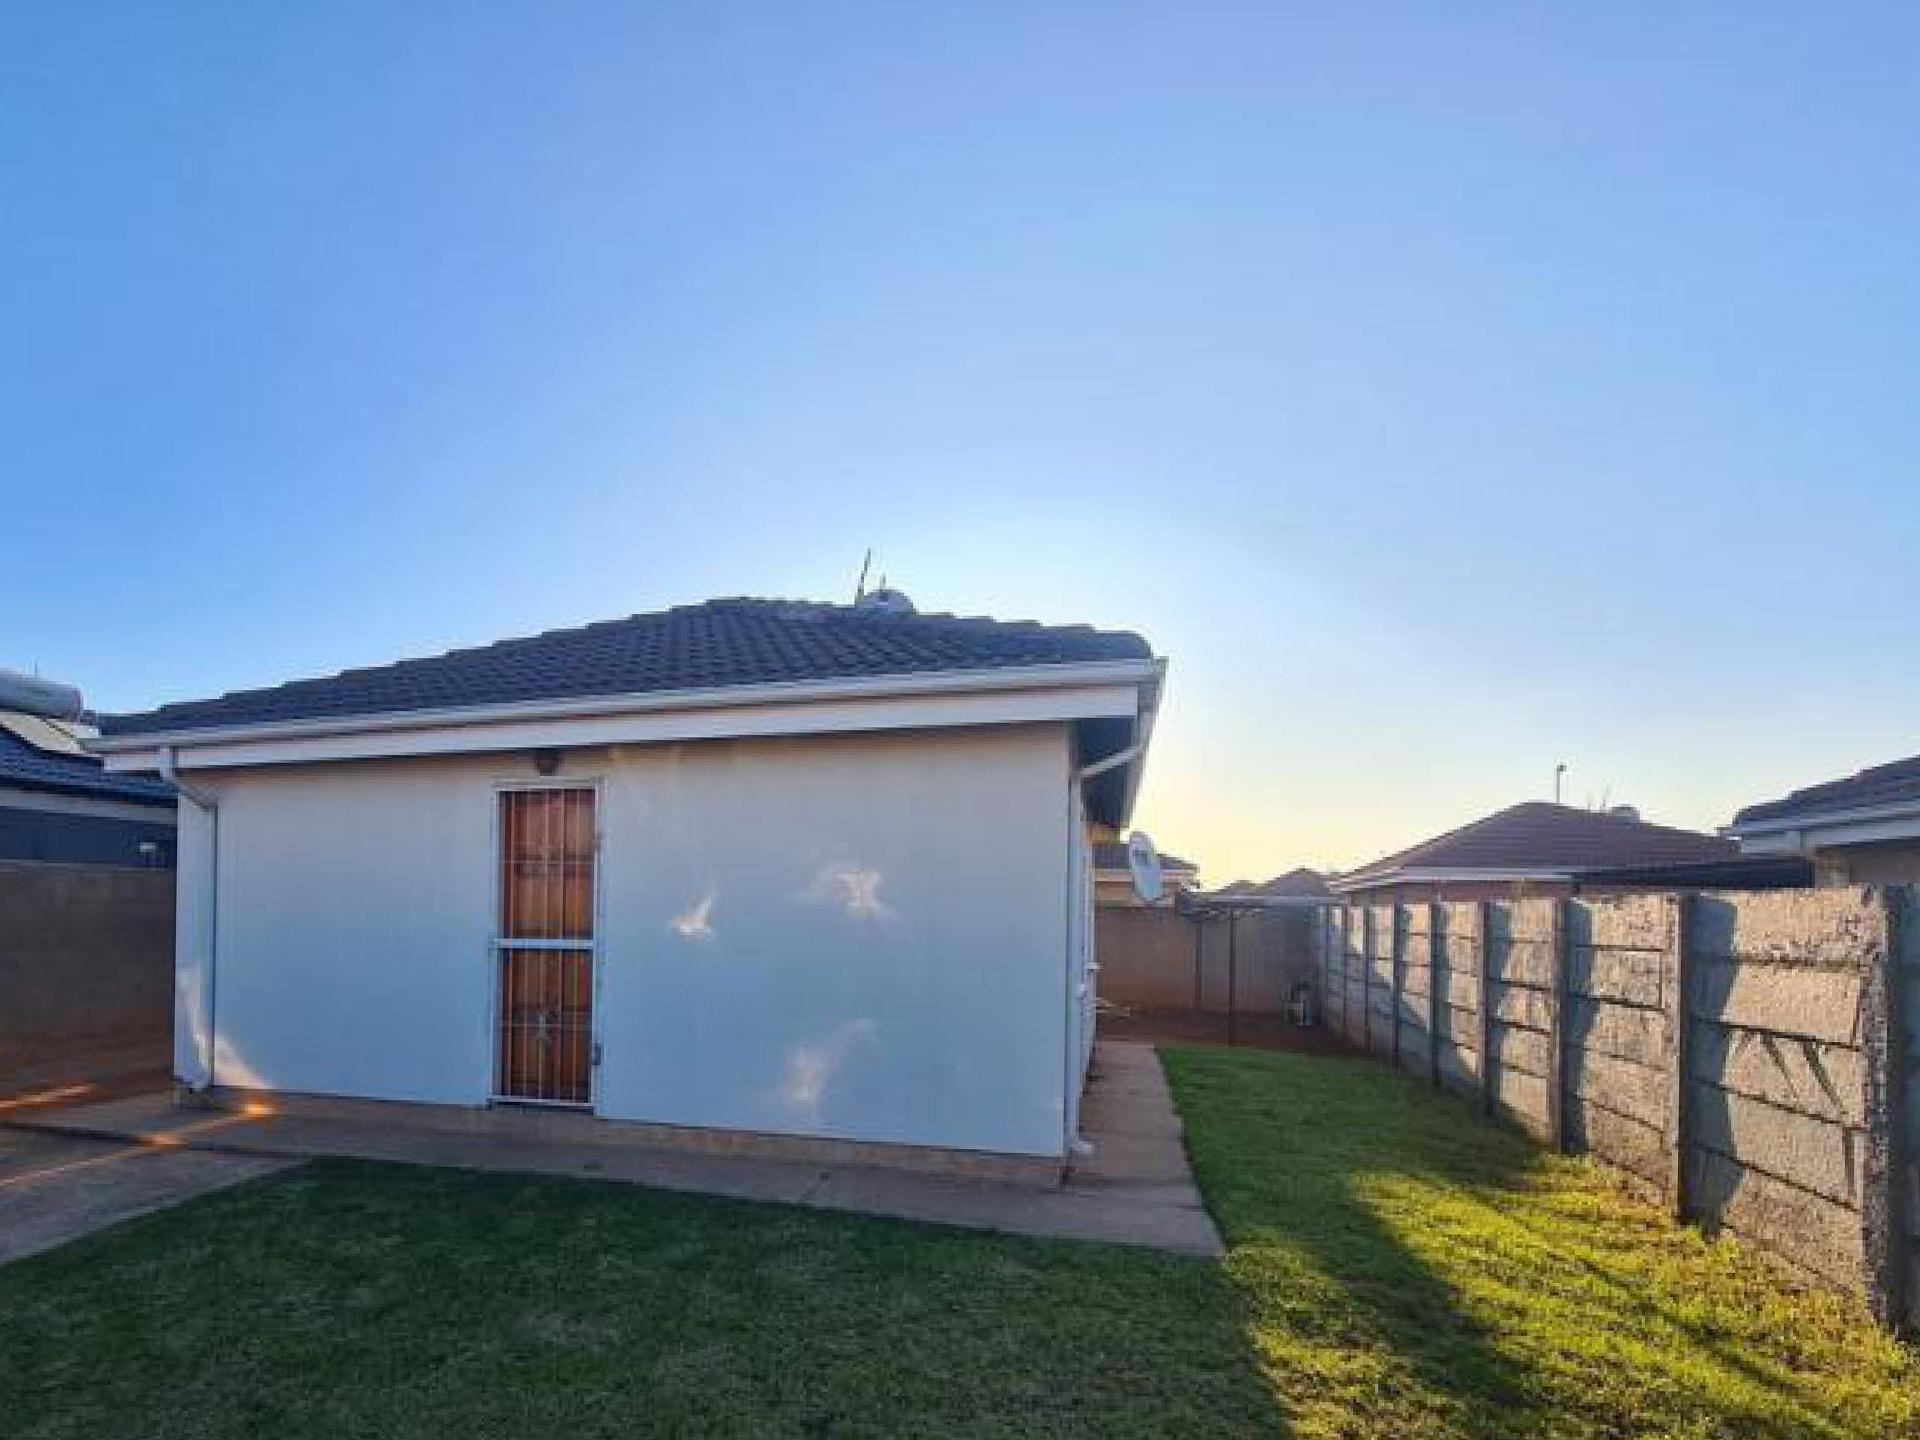 Front View of property in Benoni East AH